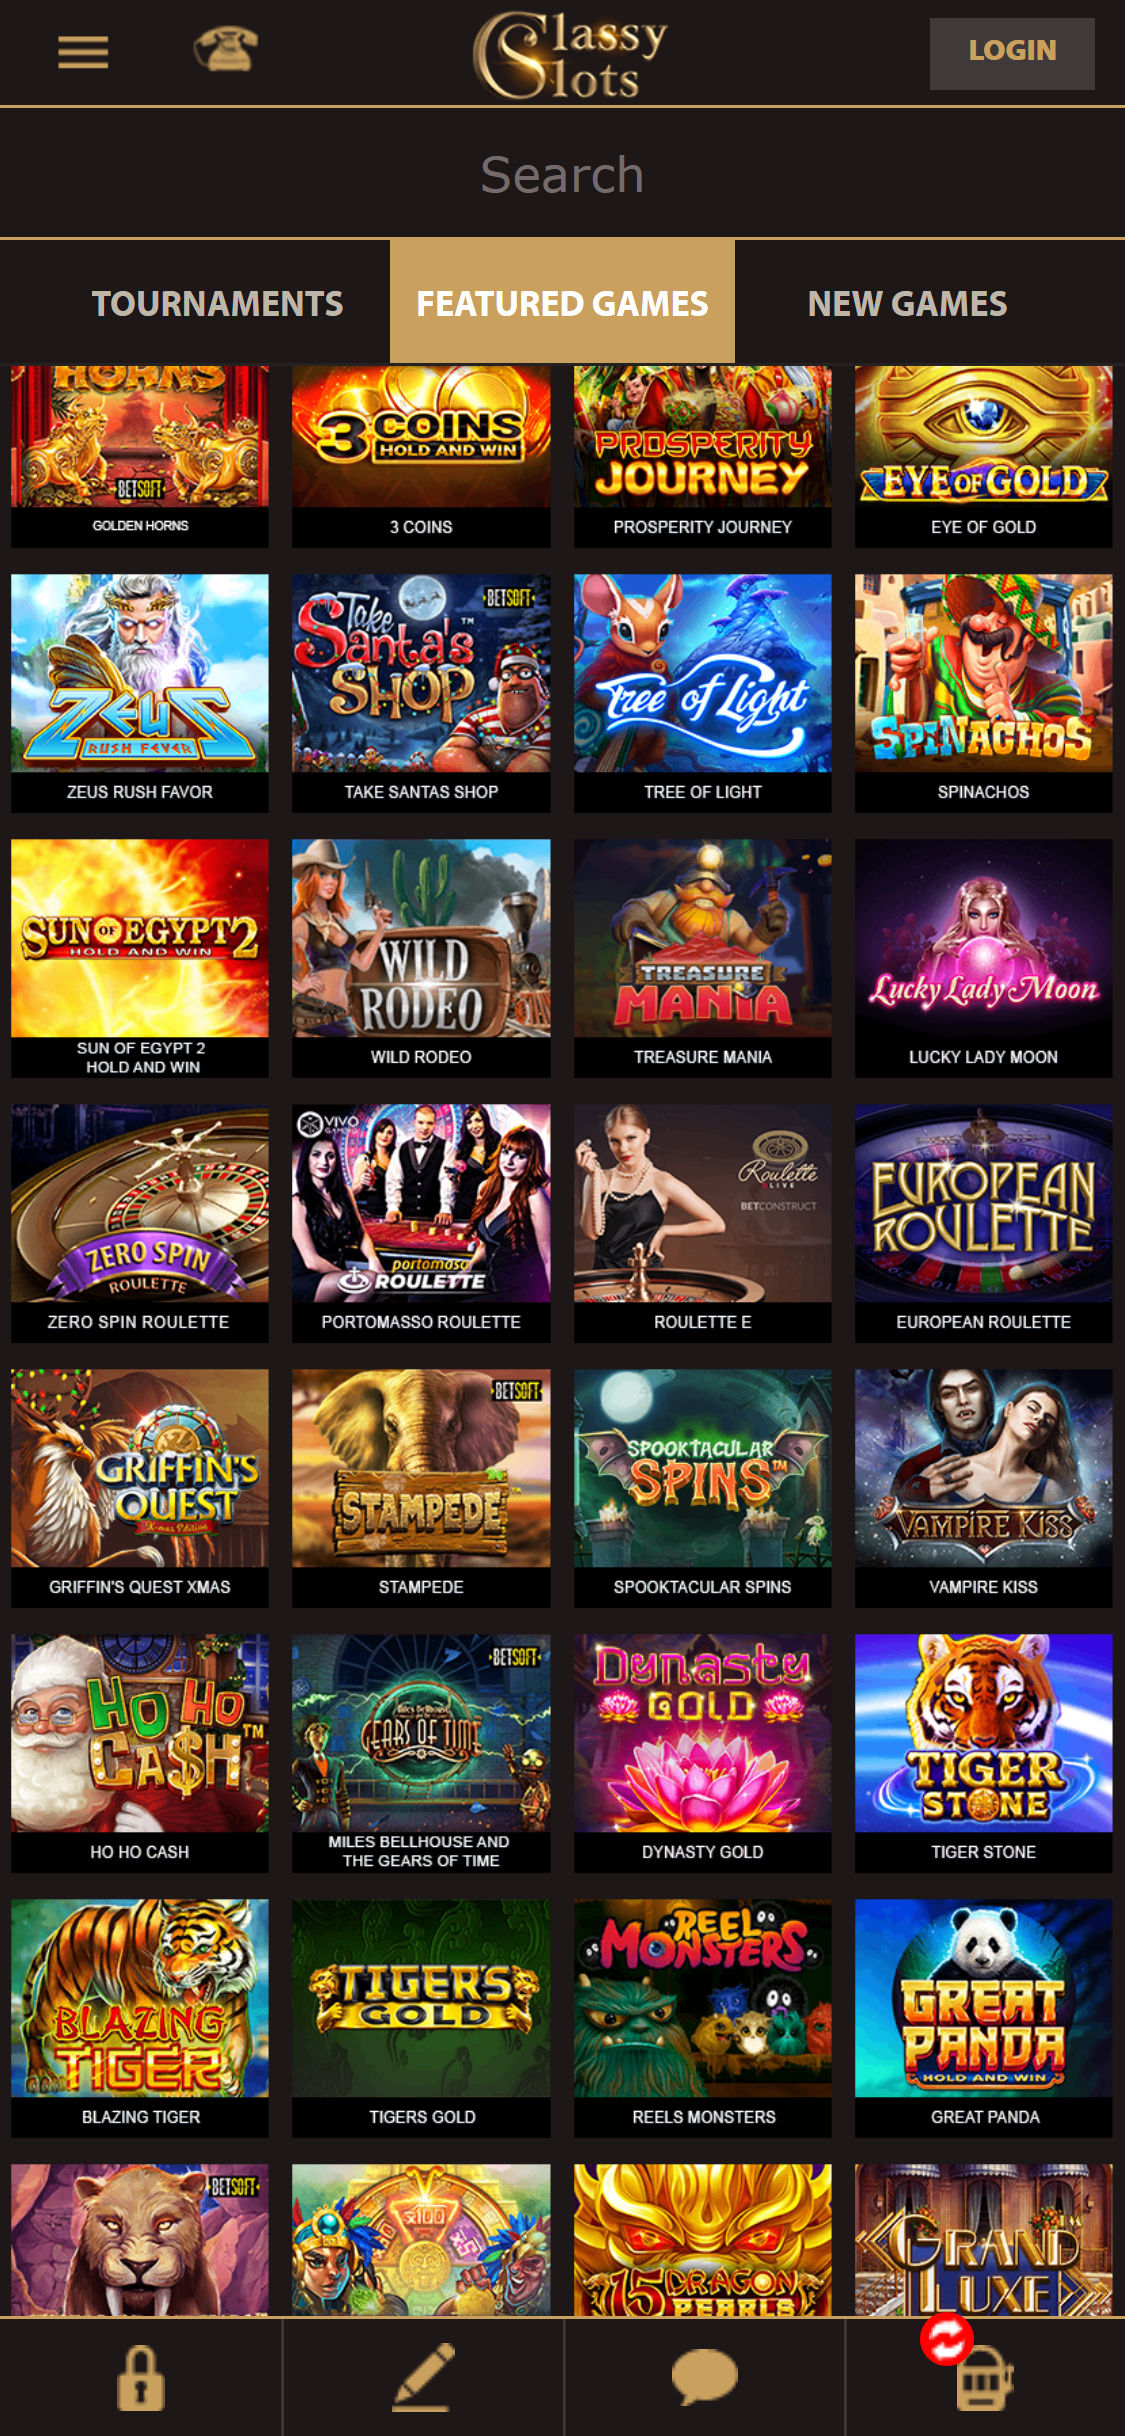 Classy Slots Casino Mobile Games Review